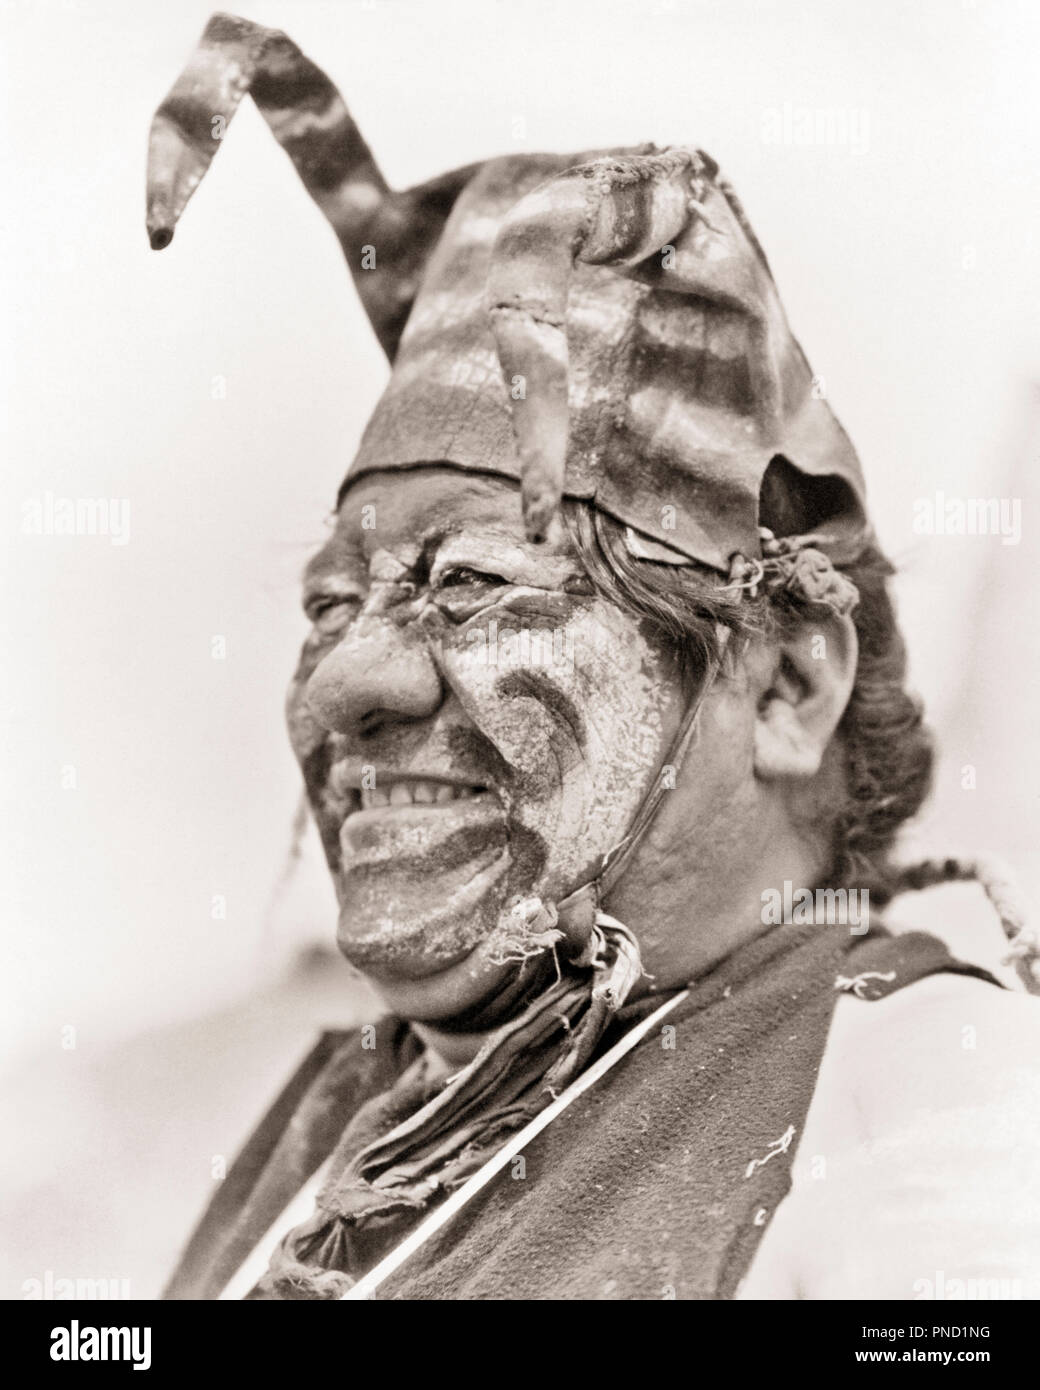 1930s HEAD CLOWN COCHARE KOSHARE IN COSTUME MAKEUP SAN ILDEFONSO PUEBLO NEW MEXICO  - i1389 HAR001 HARS MIDDLE-AGED B&W NORTH AMERICA MIDDLE-AGED MAN HAPPINESS HEAD AND SHOULDERS CHEERFUL RELIGIOUS LEADERSHIP PRIDE SACRED SMILES JESTER JOYFUL NATIVE AMERICAN PUEBLO FACE PAINT FAITHFUL SAN ILDEFONSO FAITH NATIVE AMERICANS NEW MEXICO TRICKSTER BELIEF BLACK AND WHITE CEREMONIAL HAR001 ILDEFONSO INDIGENOUS OLD FASHIONED Stock Photo